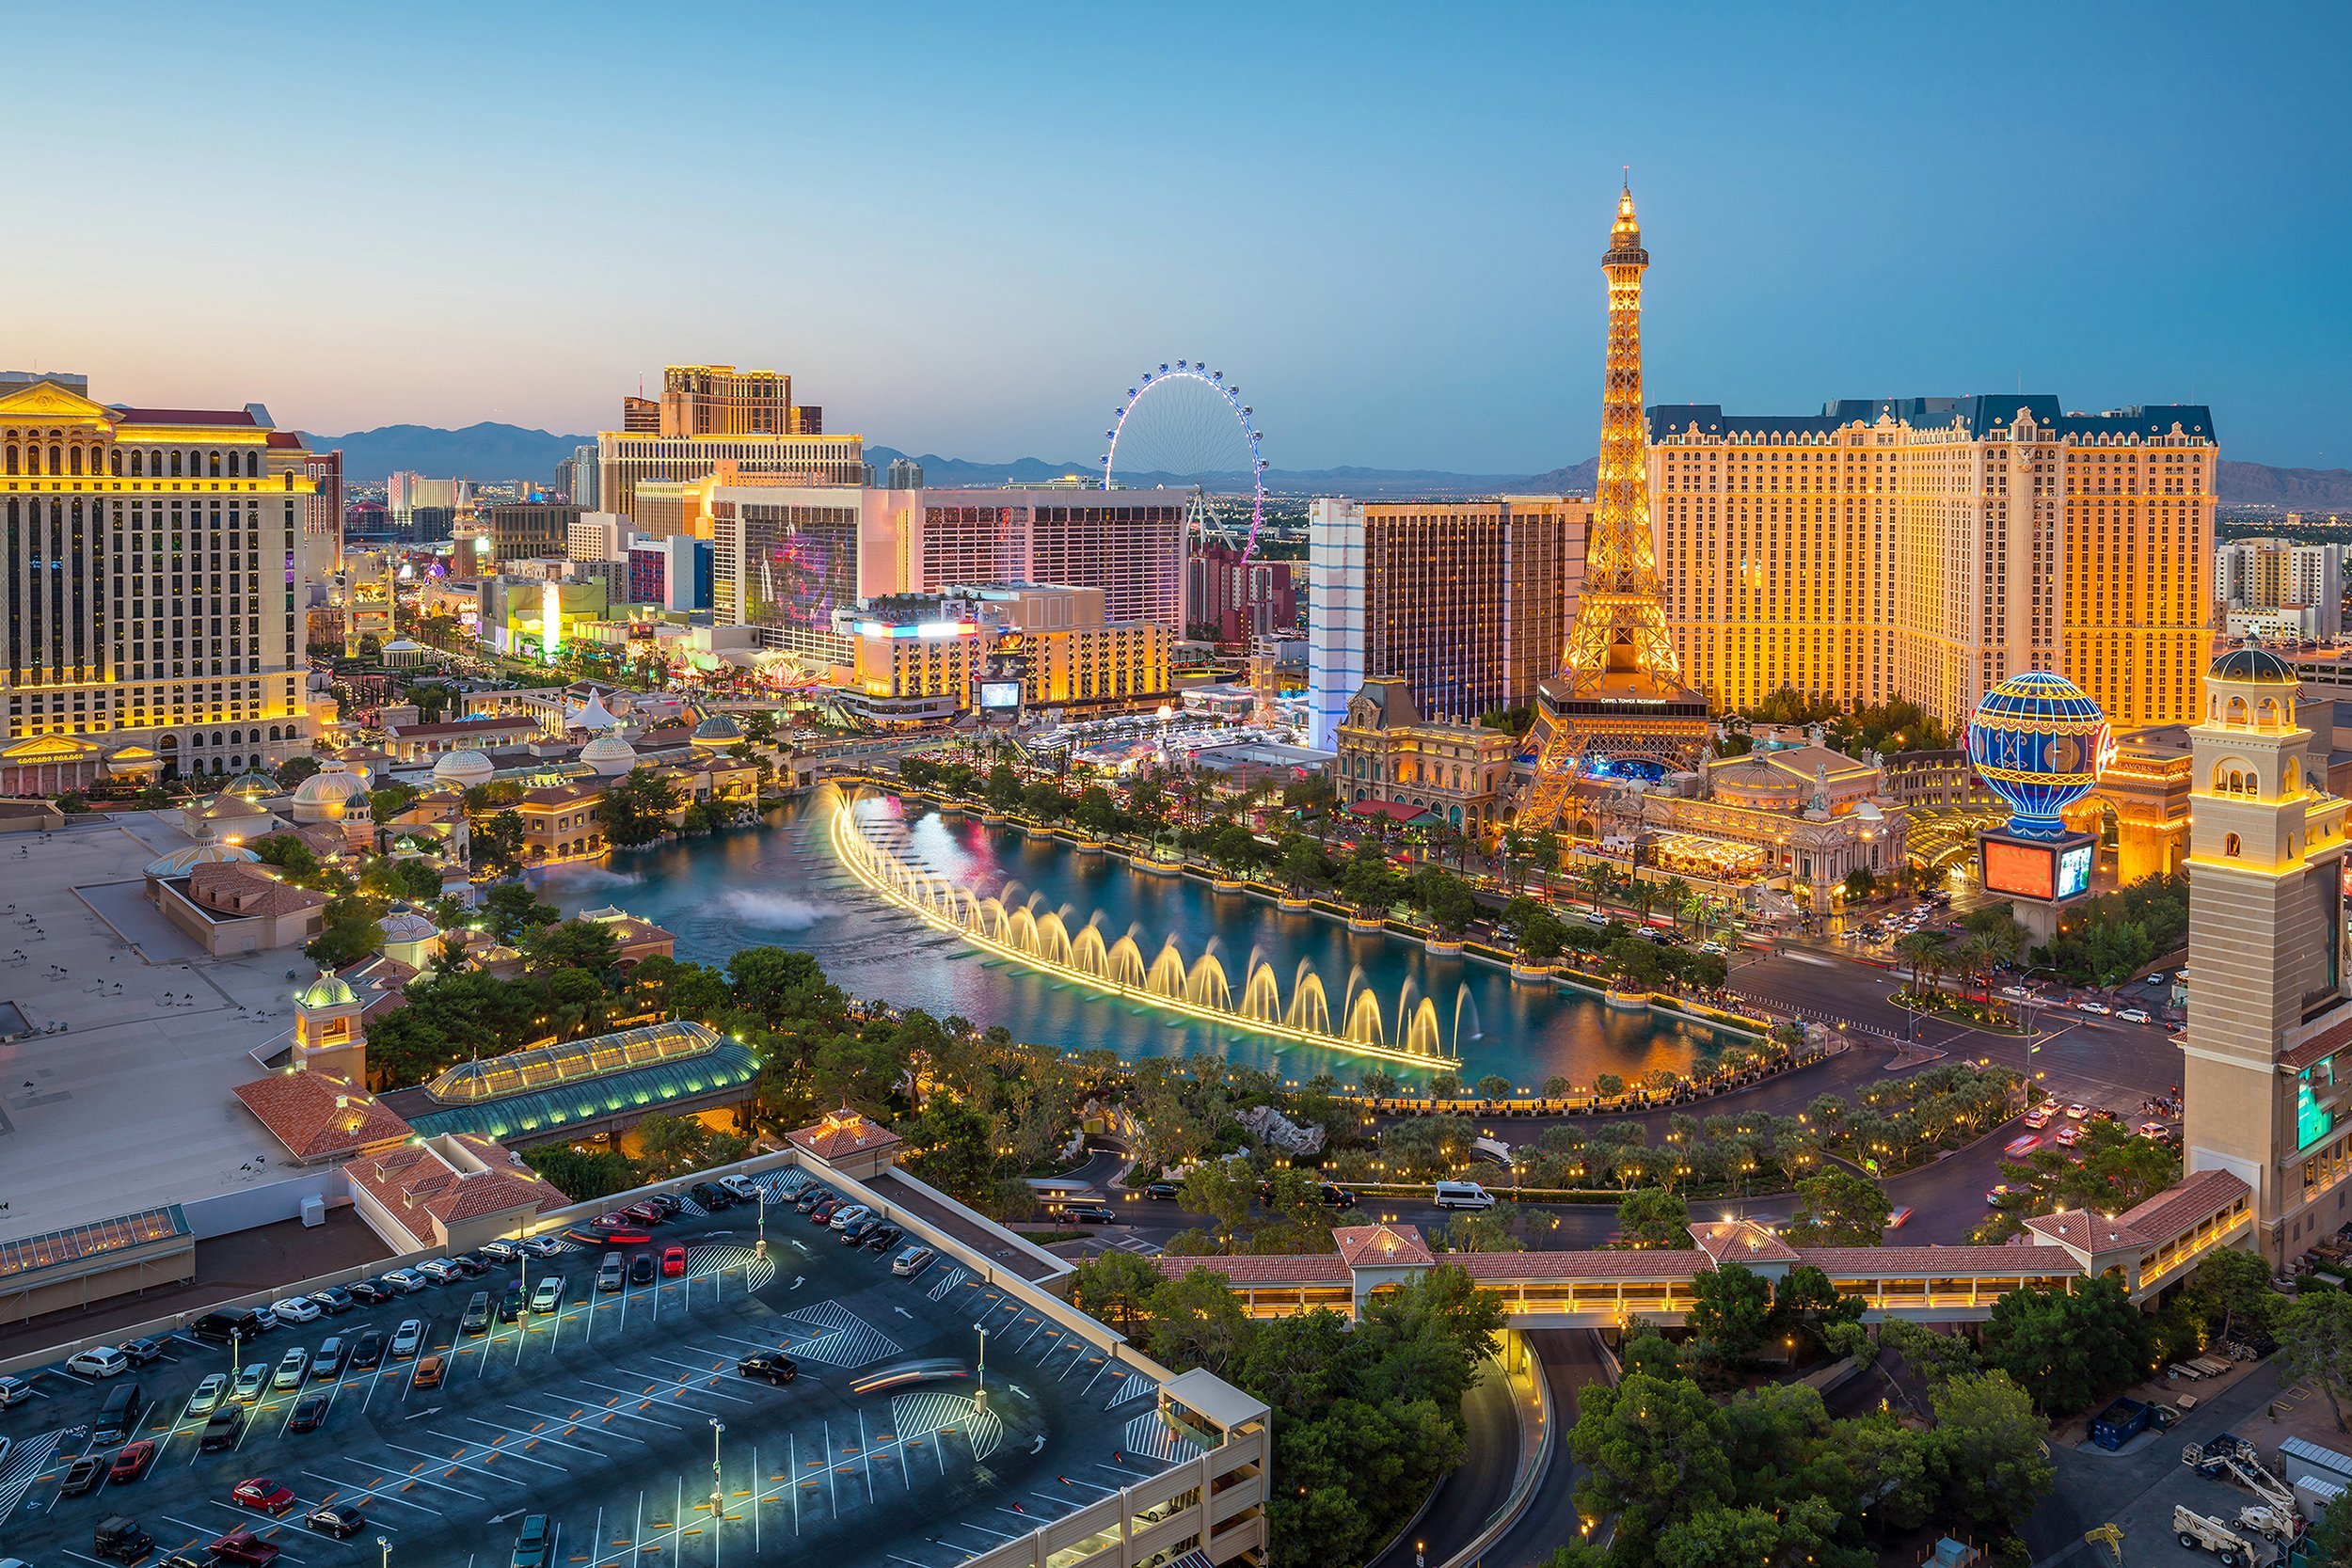 <p>Want to score in Las Vegas? Go in the spring, or hold off on visiting until September. The crowds here in summer mean higher hotel rates and less room at the pool. And then there's the temperature: It'll be regularly well above 100 degrees. When you do go, be sure to check out <a href="https://blog.cheapism.com/free-things-to-do-in-las-vegas-3468/">these fun and affordable places</a> and consider leaving the Strip to discover <a href="https://blog.cheapism.com/other-things-to-do-in-las-vegas/">unexpected, must-see attractions</a> that are typically less crowded.</p>